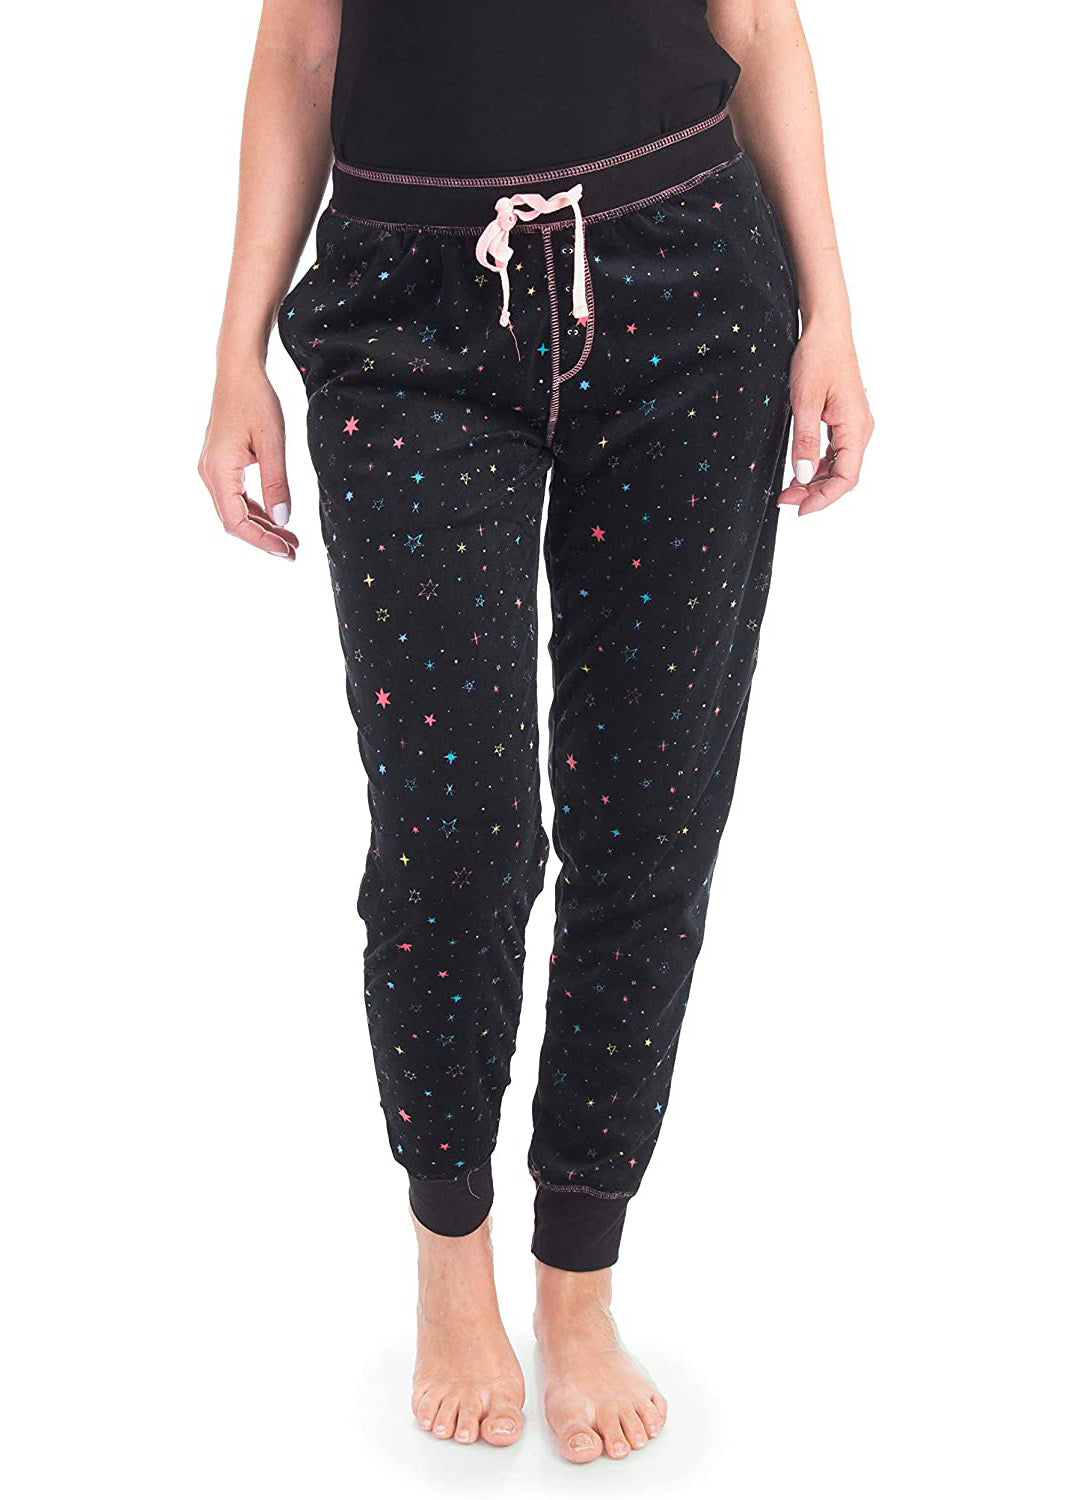 PJ joggers with soft velvety texture, stretch, elastic waistband, drawstring, and stylish ankle cuff. This pattern is scattered stars, very small pink, blue, yellow stars on a black background. The product has a pink overstitch.